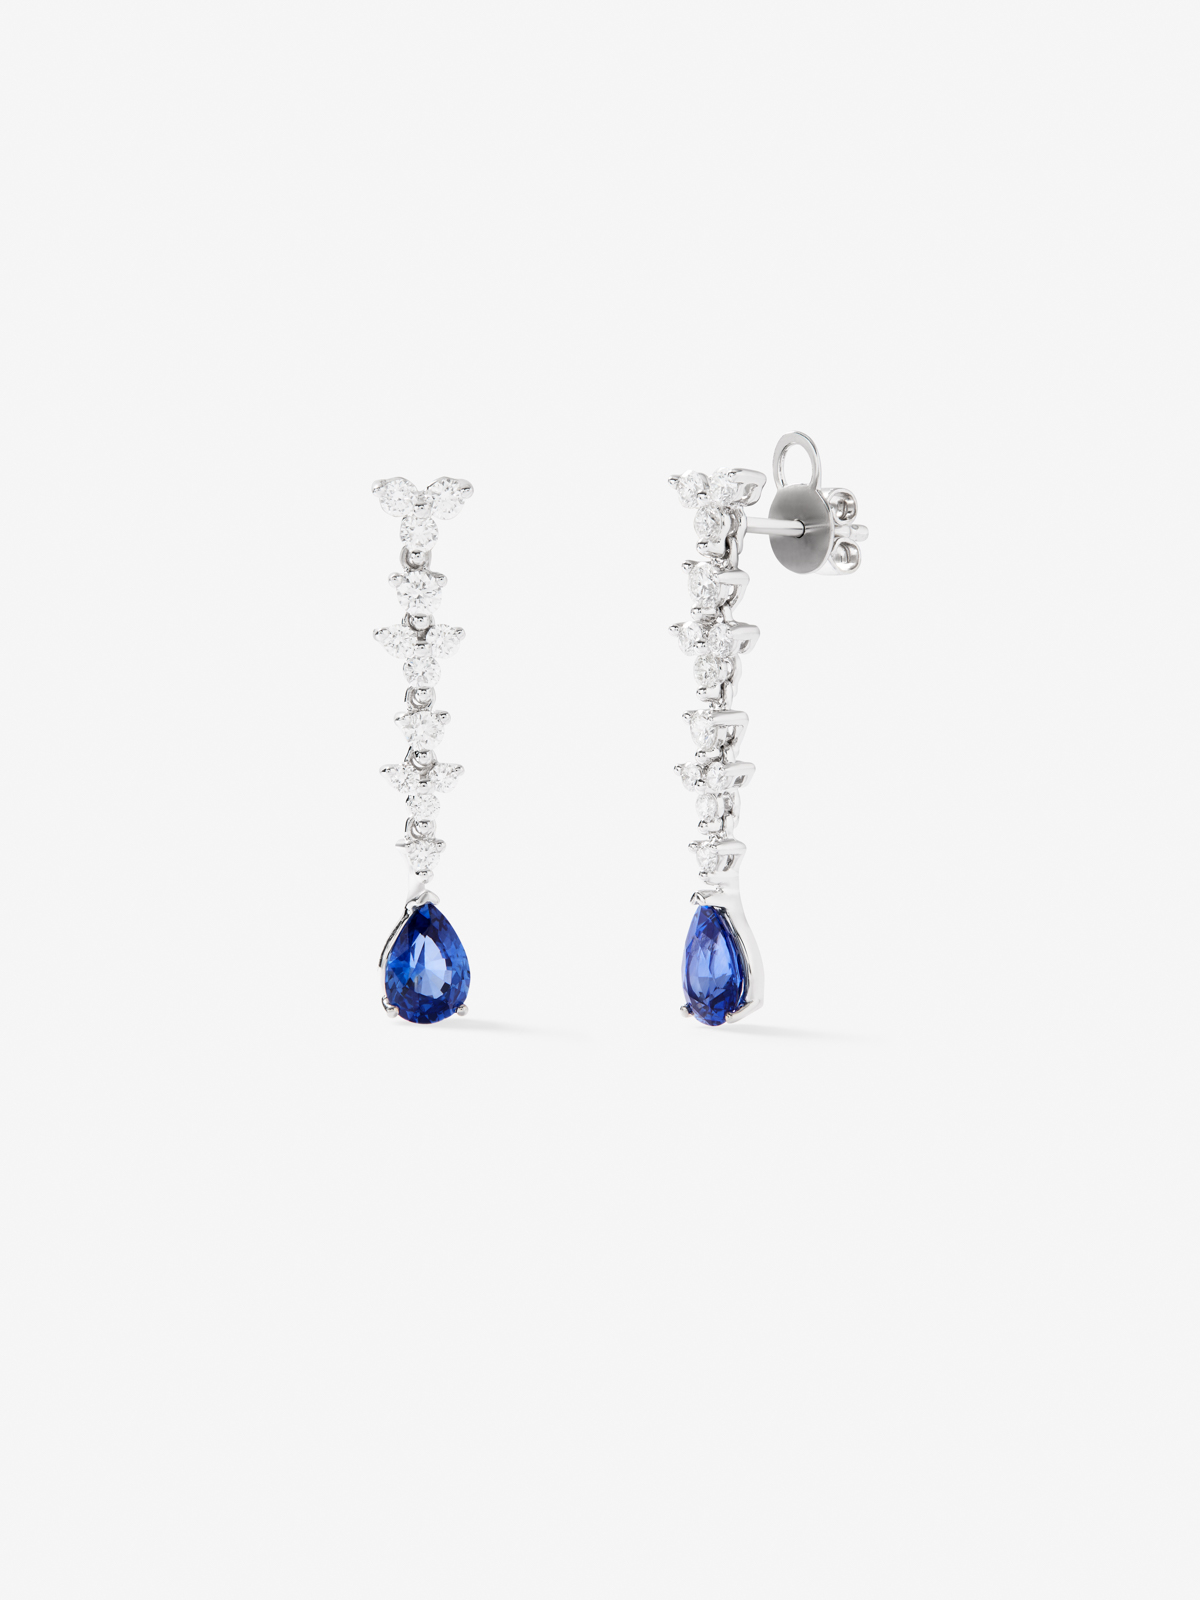 18K white gold earrings with blue zafiros in 1.82 cts and white diamonds in bright 0.86 cts